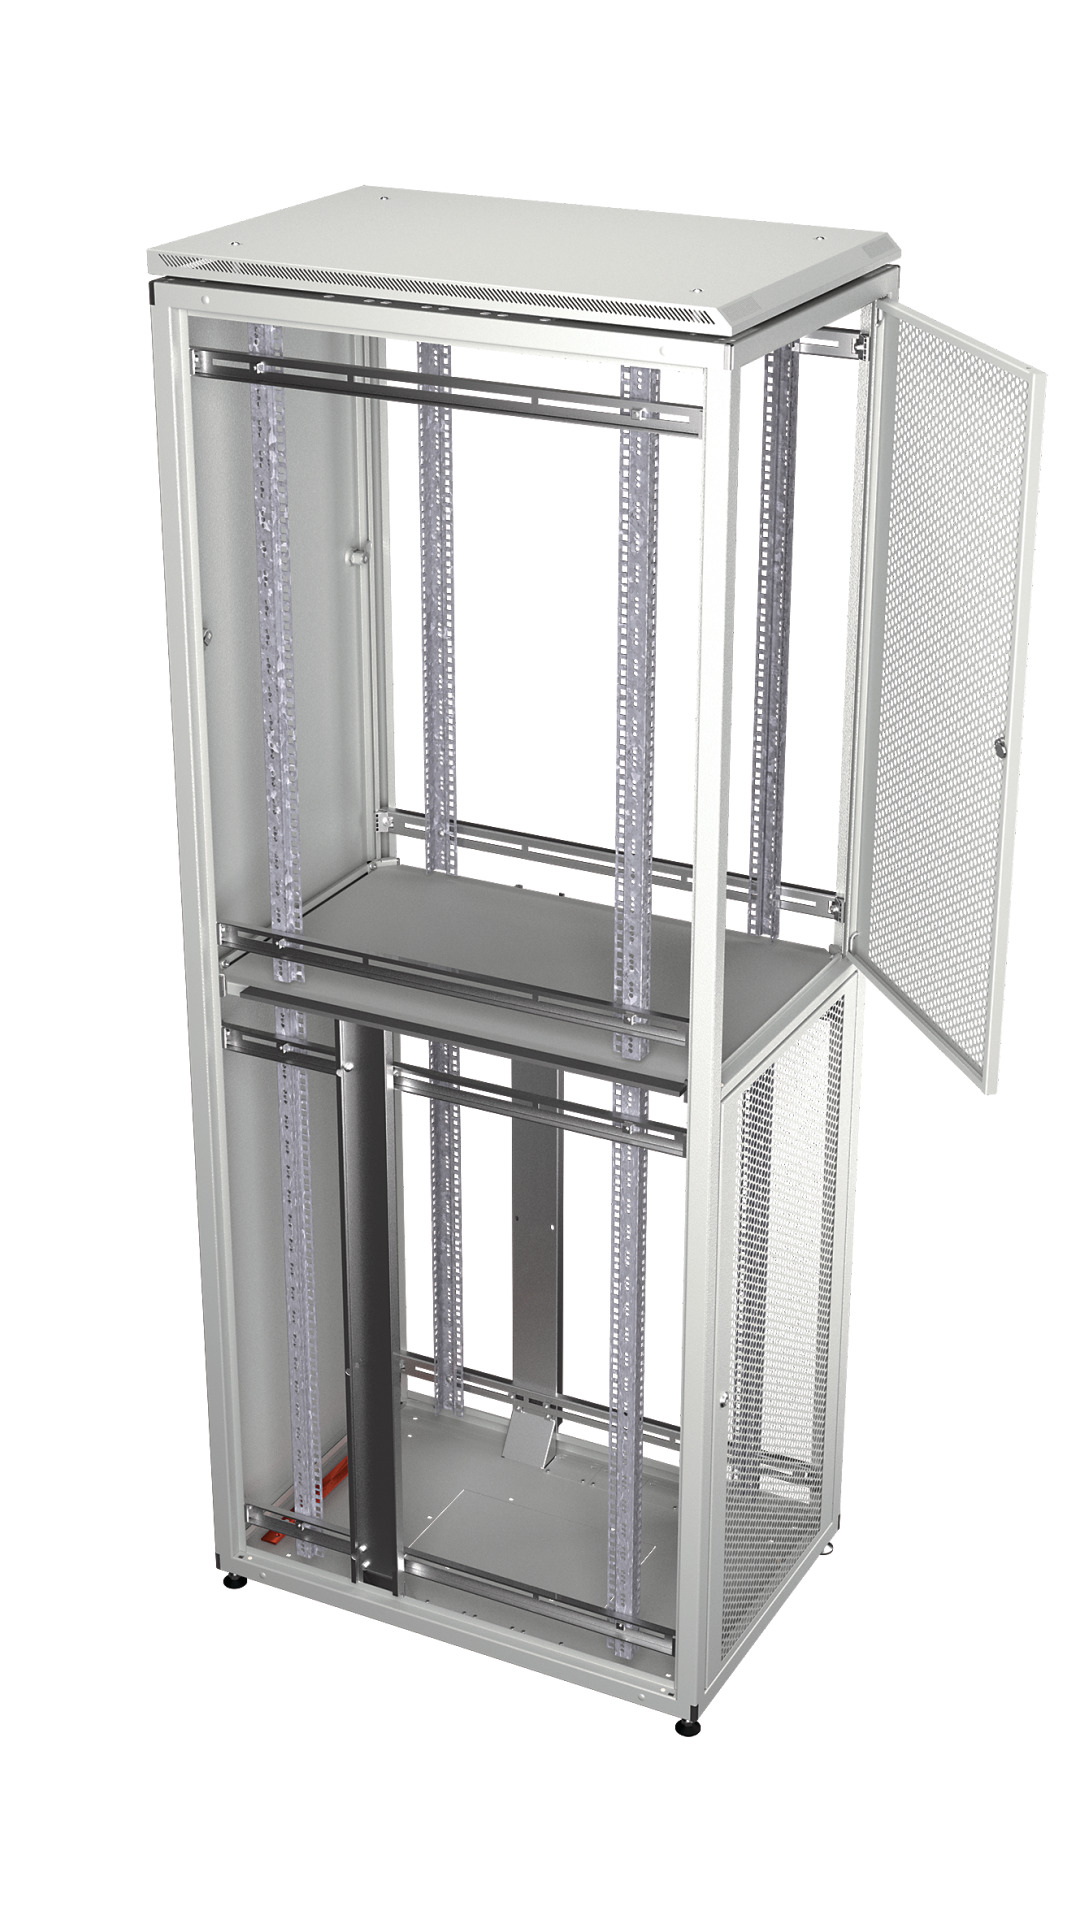 Co-Location Rack PRO, 2 x 20HE, 600x1200 mm, F+R 1-tlg. perforiert, RAL9005